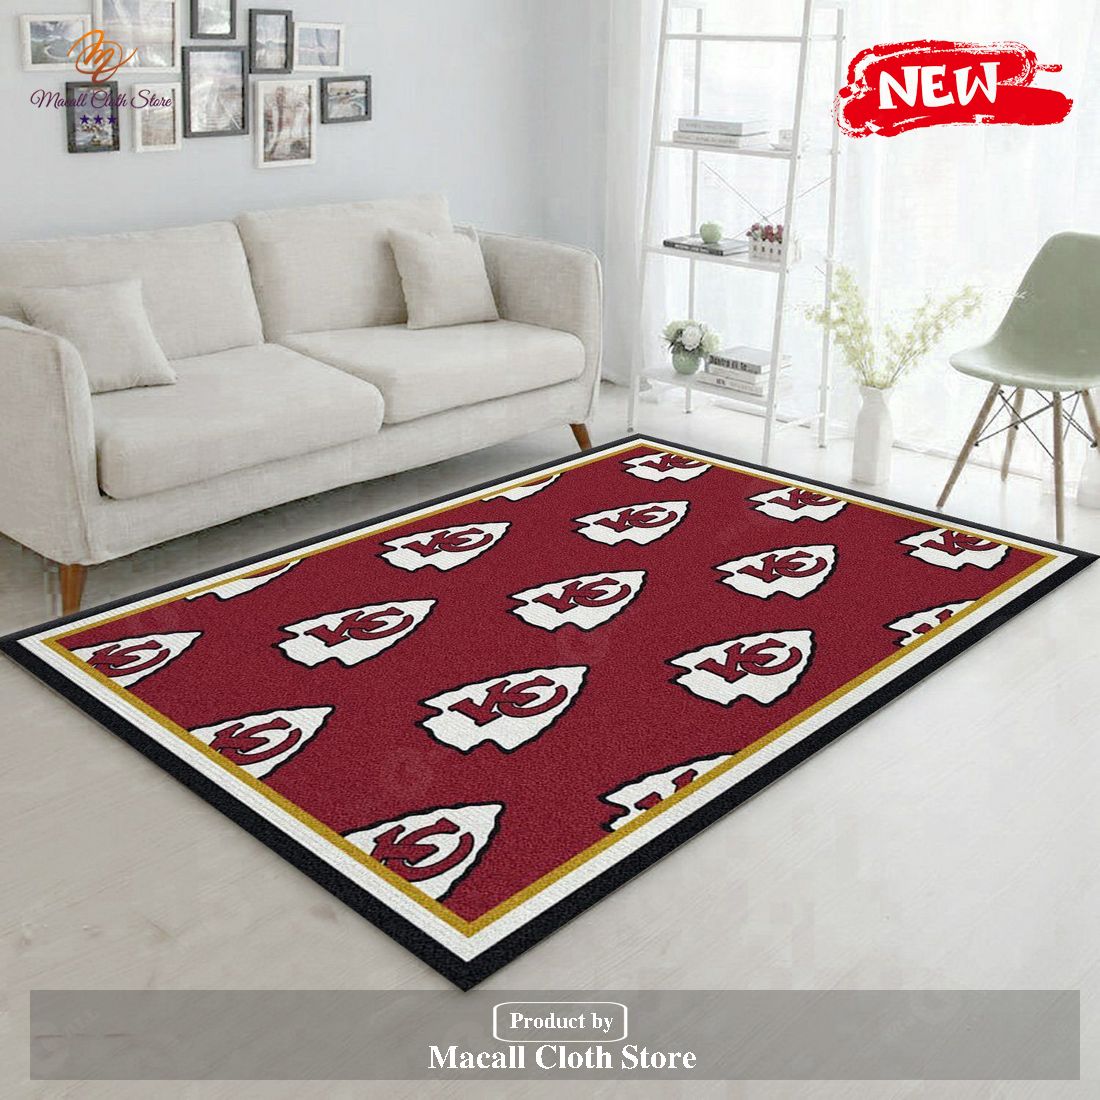 NFL Team Repeat Rug - Kansas City Chiefs (Red Background), 3'10x5'4 -  Kansas City Chiefs (Red Background) | NFL Team Repeat Rug